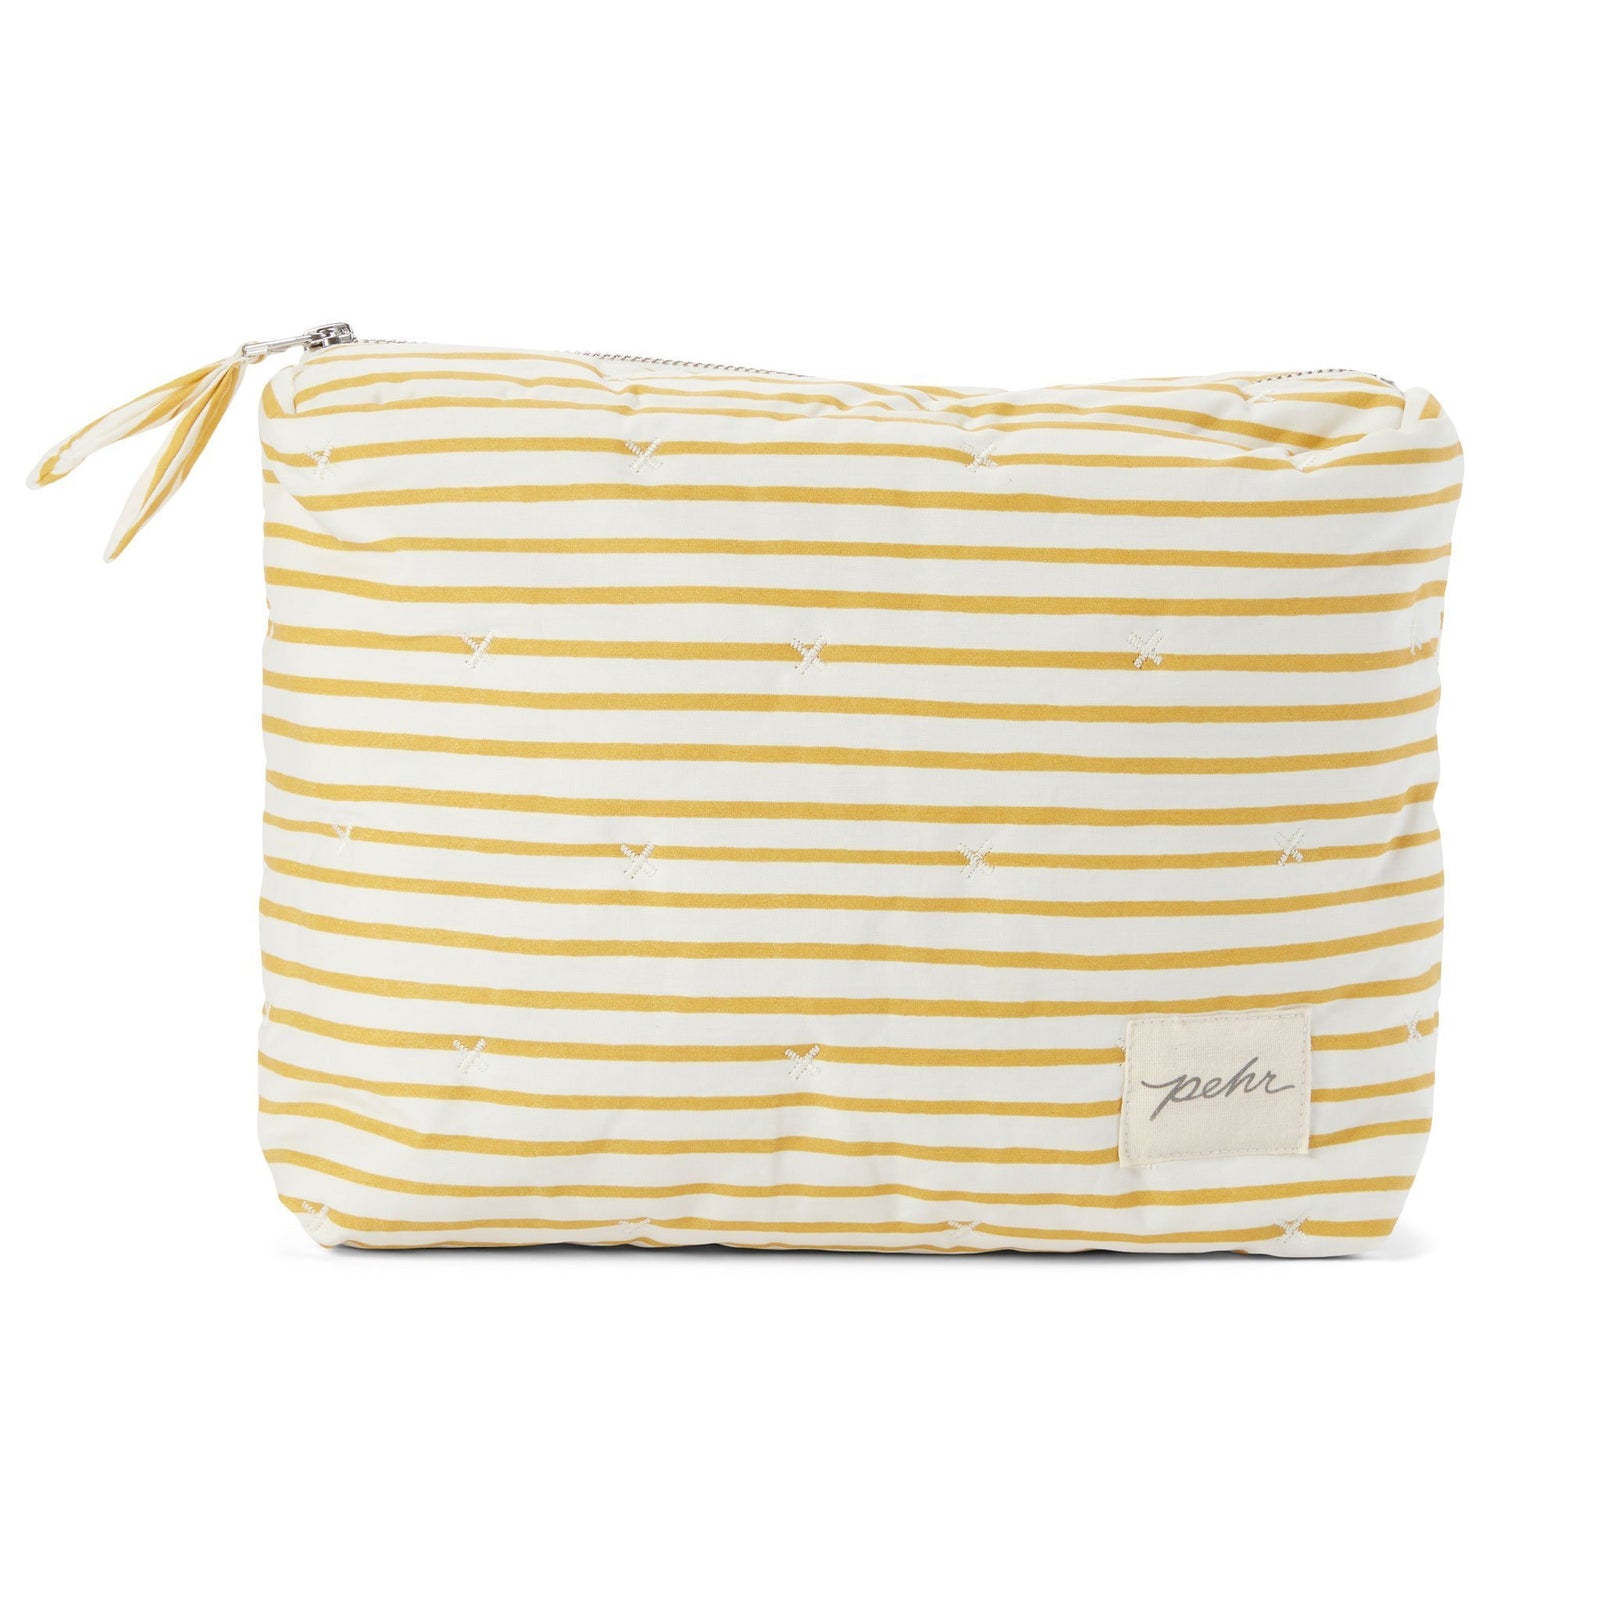 Pehr Marigold Organic On The Go Travel Pouch. GOTS Certified Organic Cotton & Dyes. White with gold stripes and zippered close.